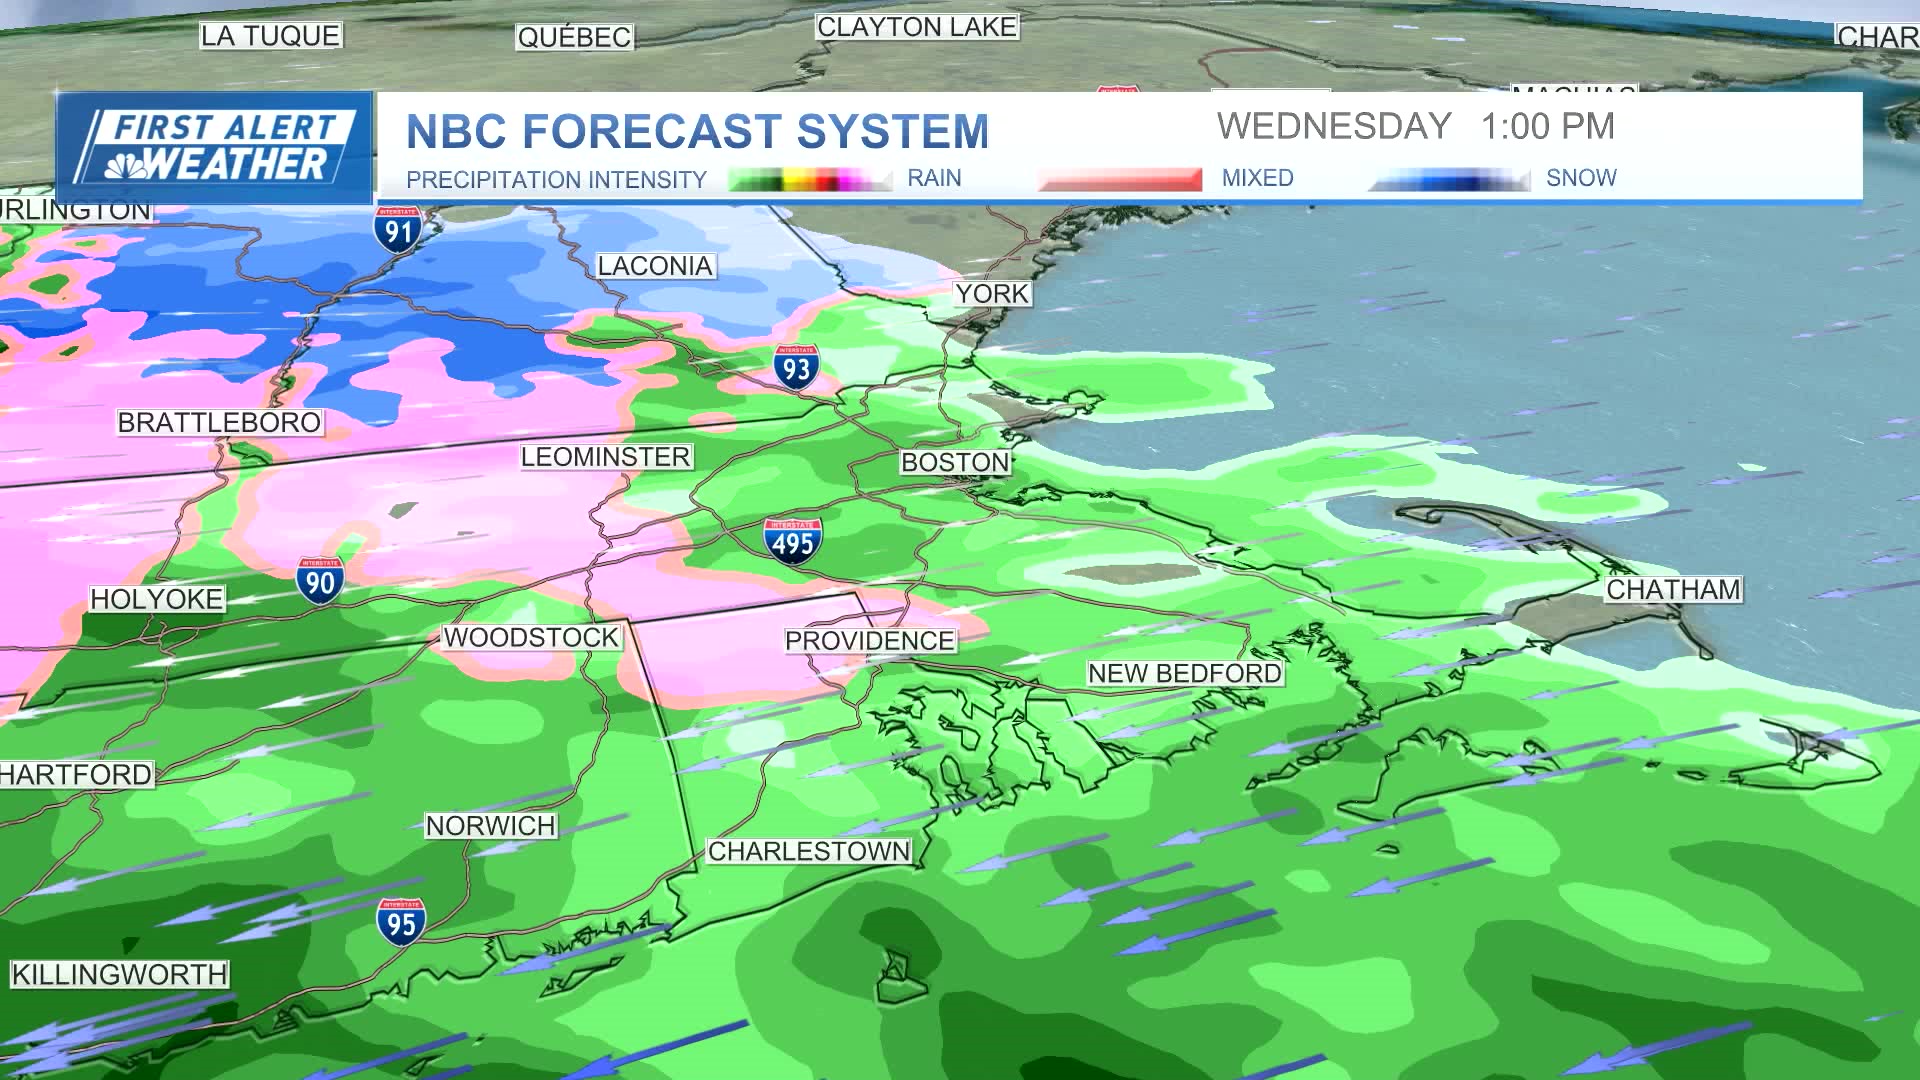 Rain is expected to be widespread across Boston, with a wintry mix in Worcester and into southern New Hampshire, in the early afternoon of Wednesday, April 3, 2024, according to the NBC forecast system.